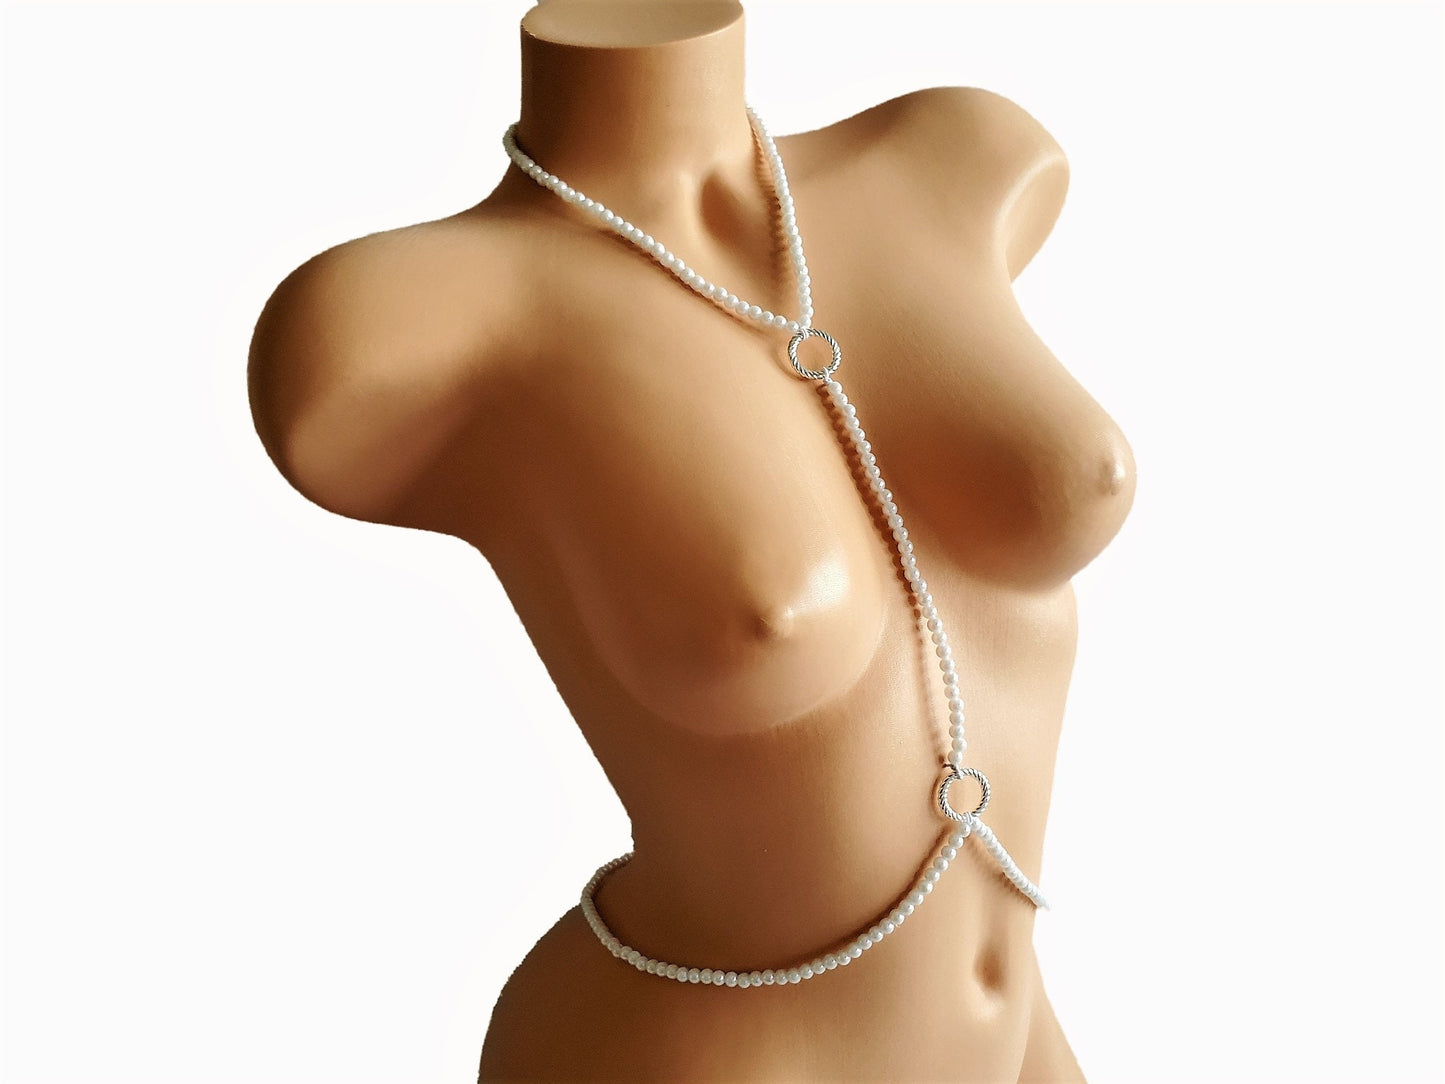 White Pearl Beaded Body Chain Jewelry Beautiful Pearl Lingerie